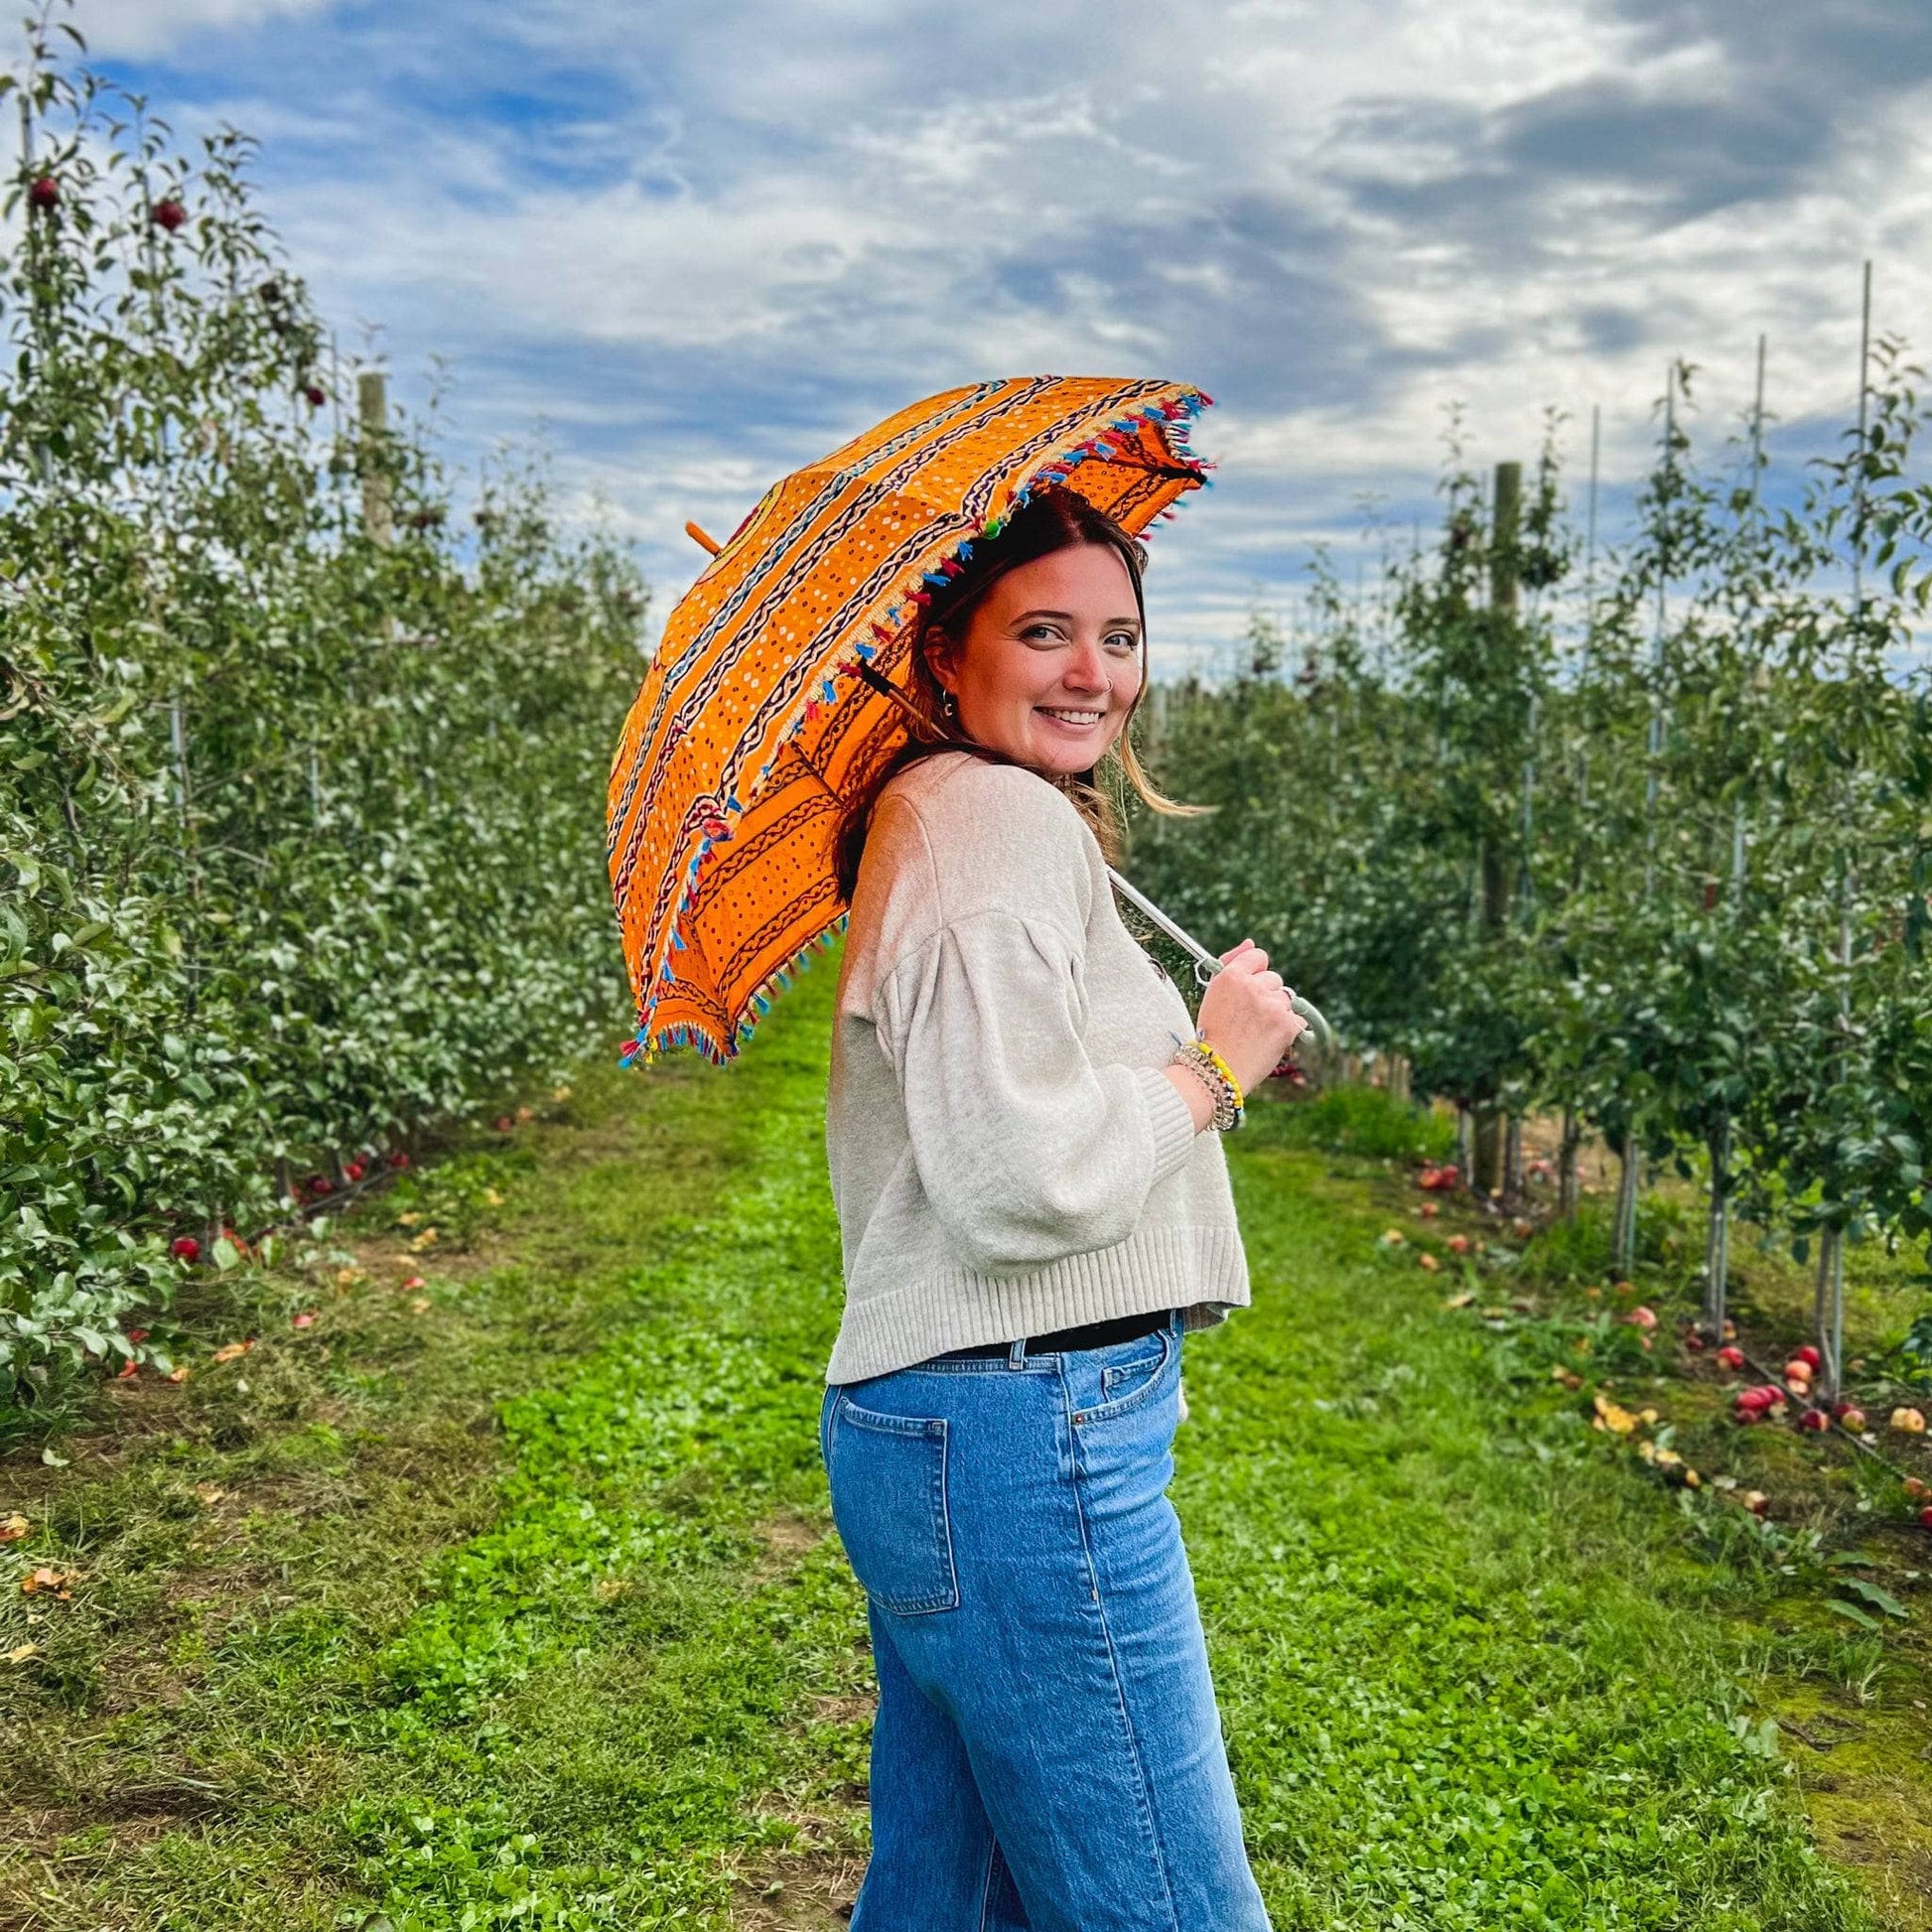 Model is standing in an apple orchard holding an orange Embellished Parasol Umbrella